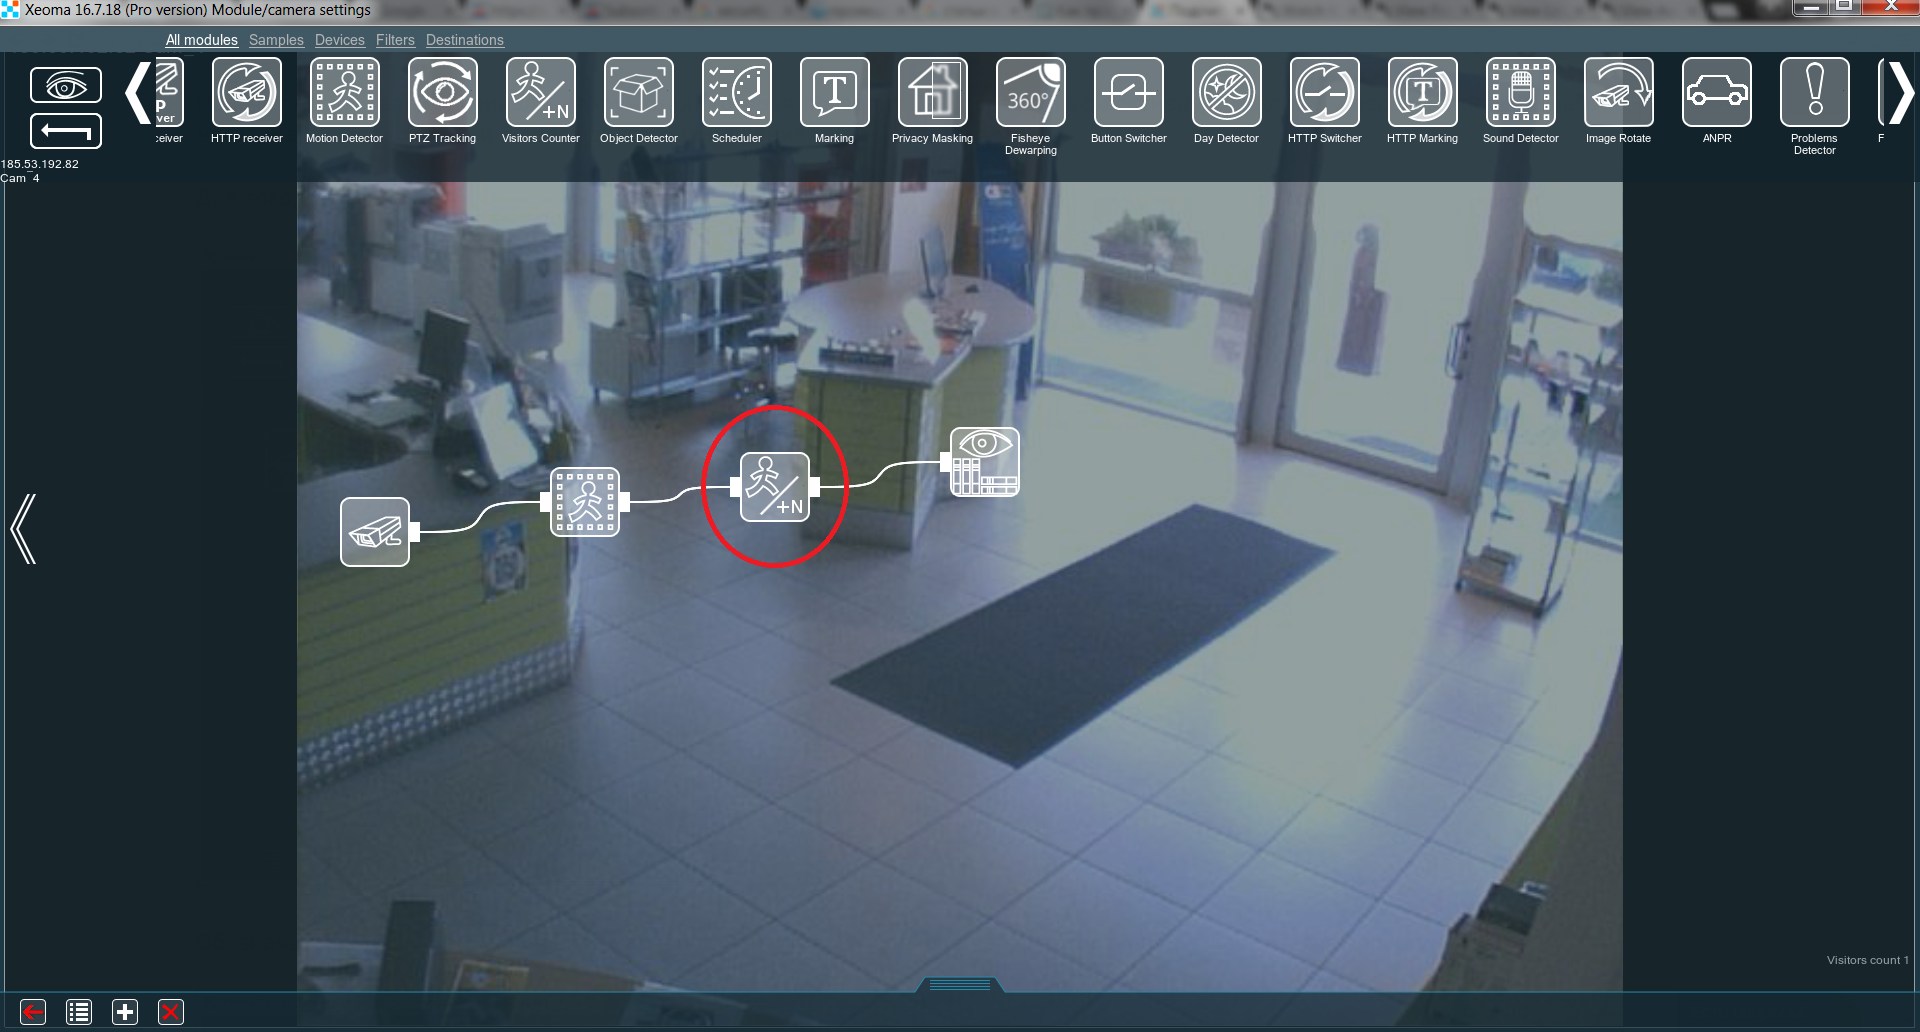 Place the “Visitors Counter” after the “Motion Detector” in your chain